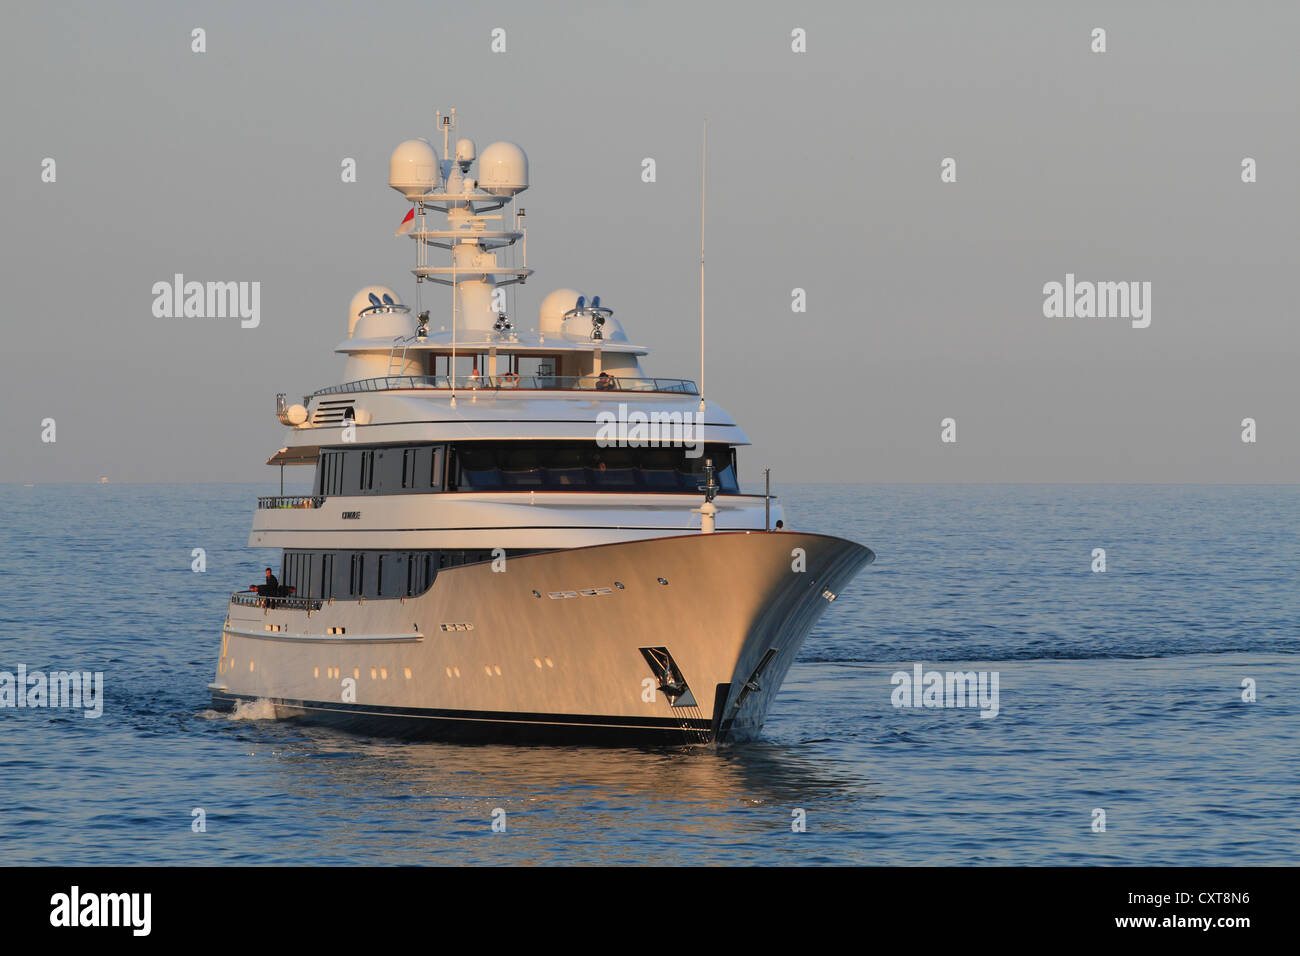 Drizzle, a cruiser built by Feadship, length: 67.27 meters, built in 2012, Monaco, French Riviera, Europe Stock Photo